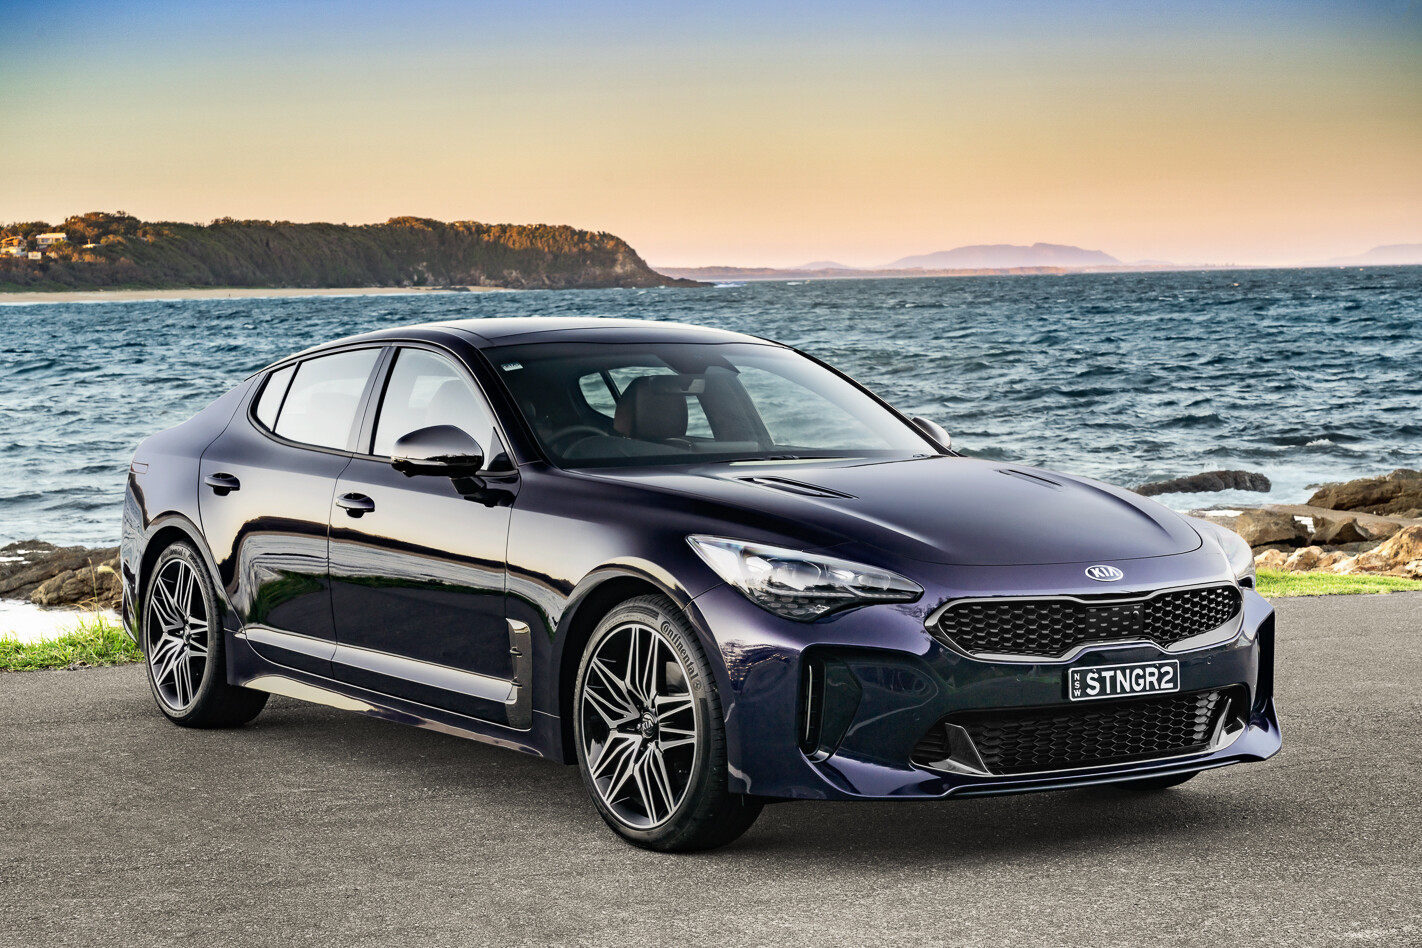 21 Kia Stinger Pricing And Features